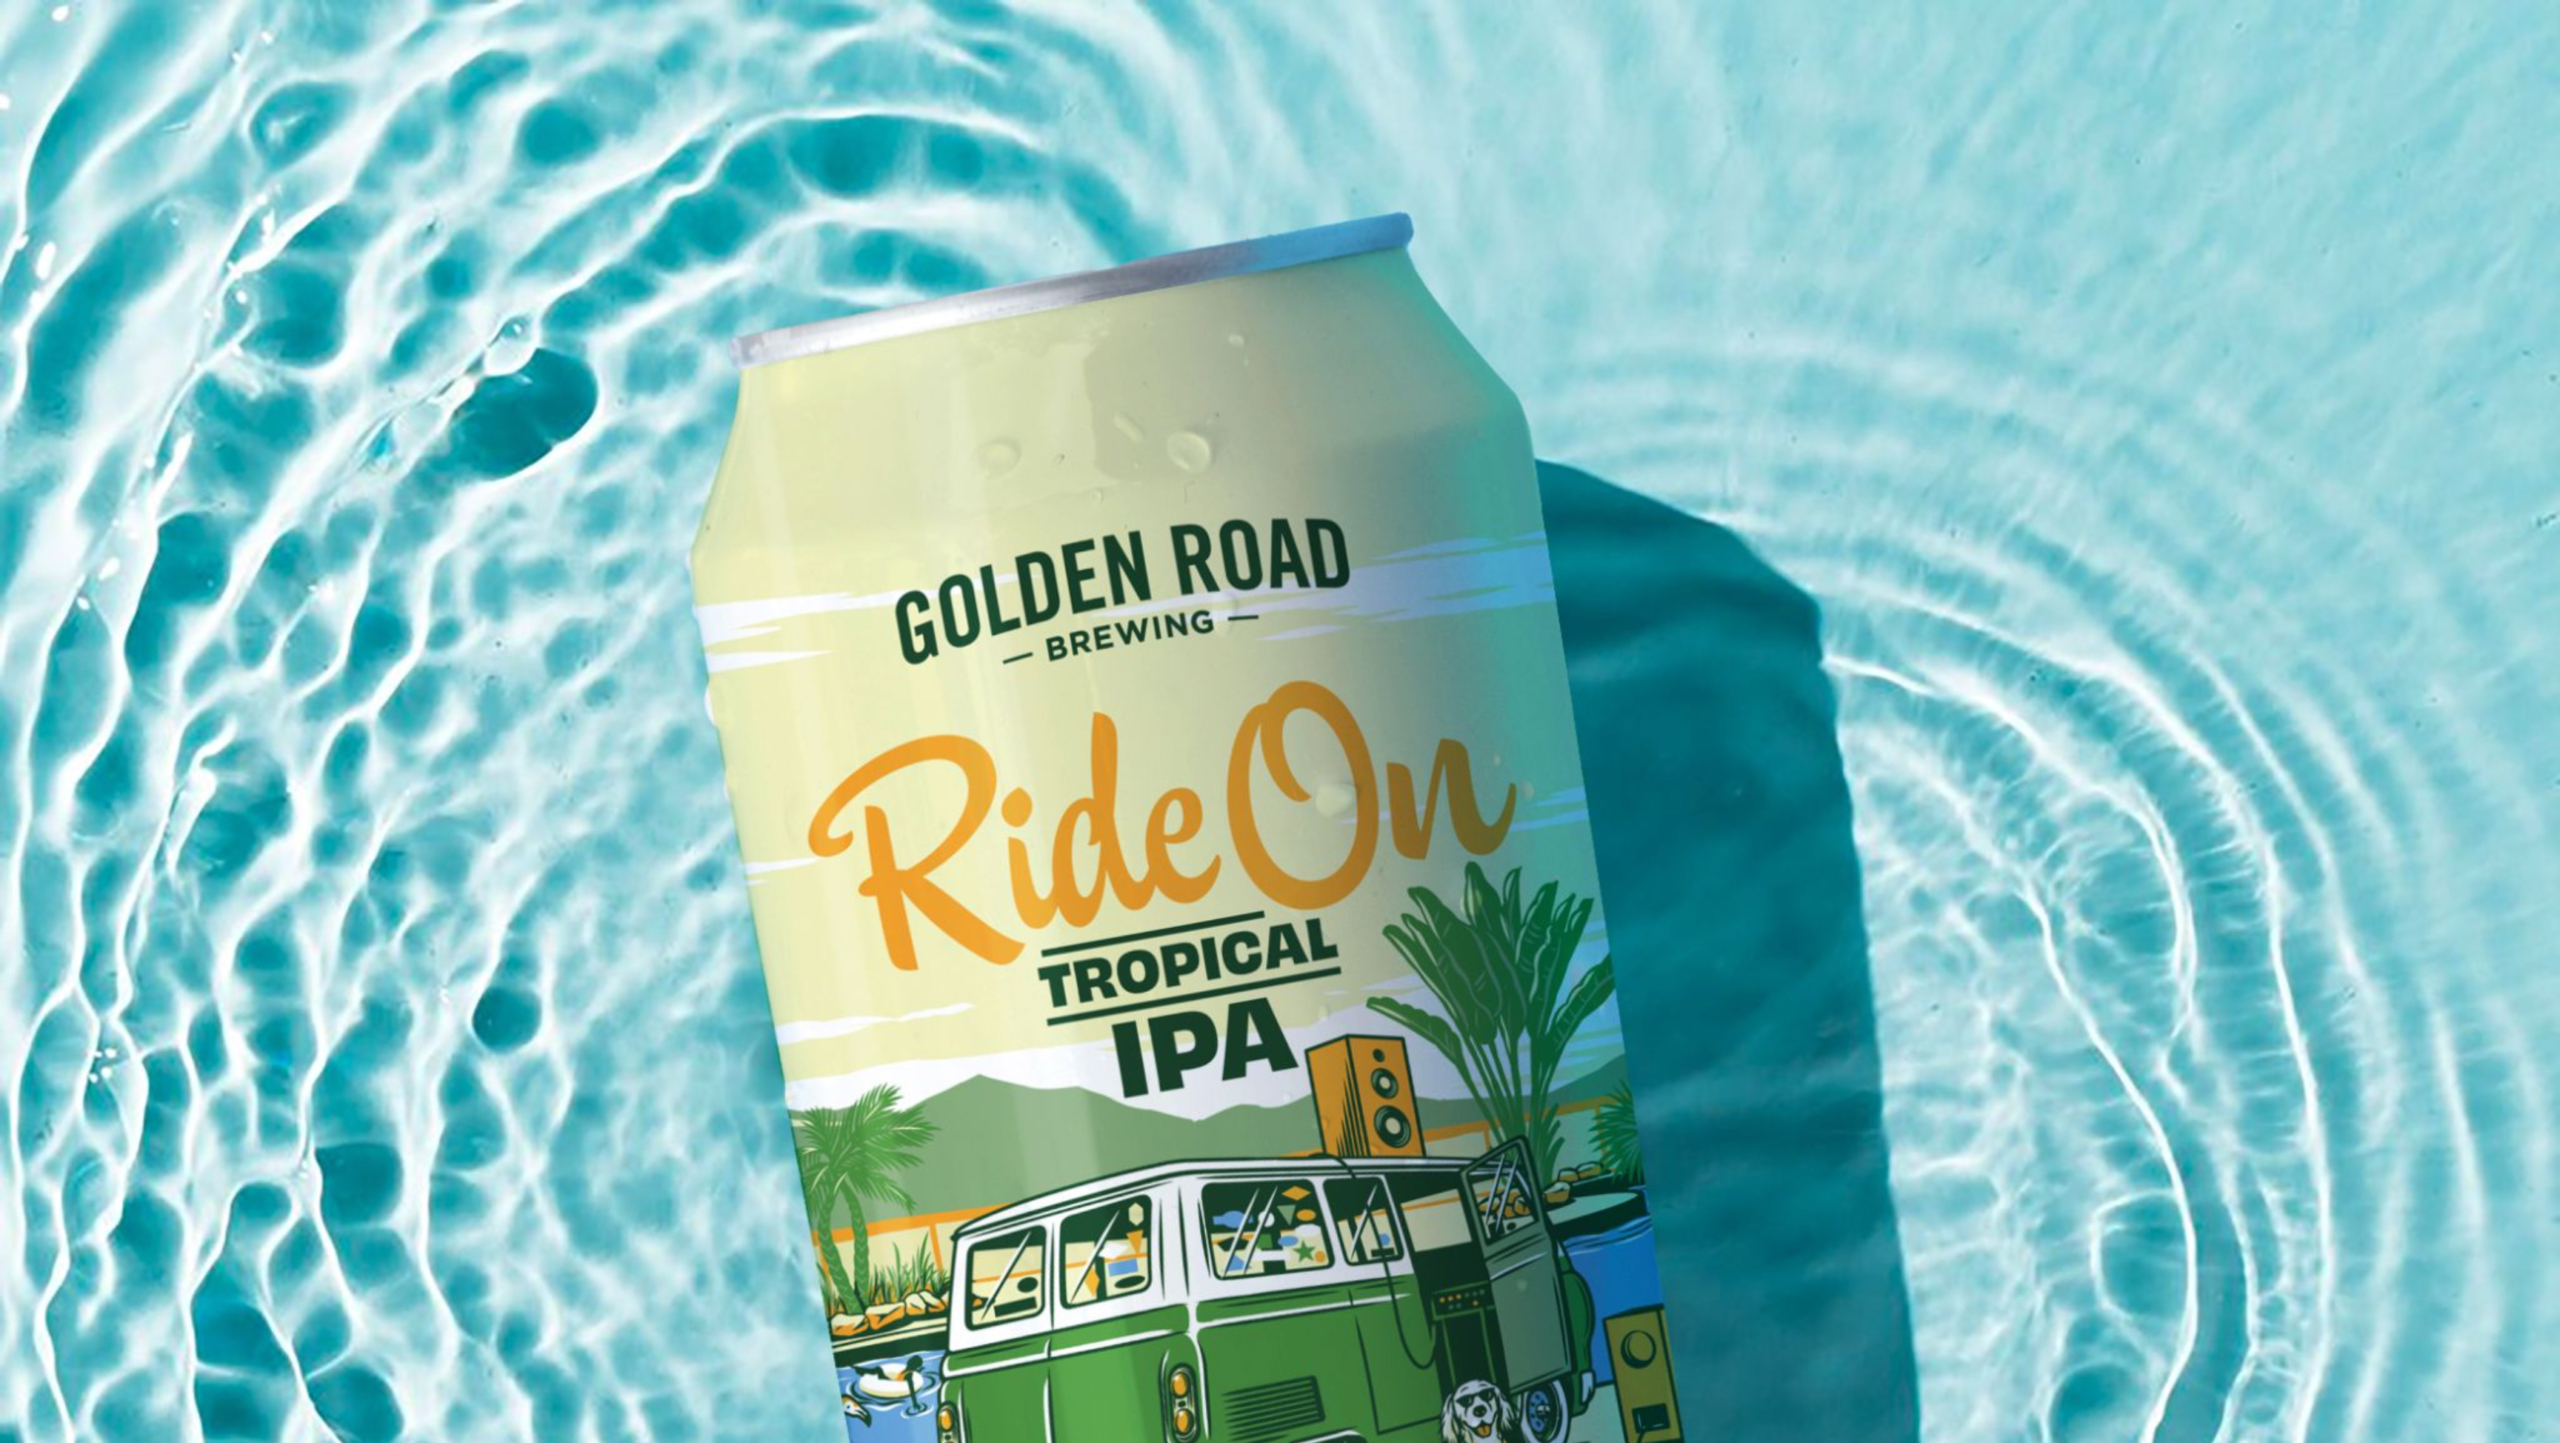 A Golden Road beer can lays in a pool of water. The can is greenish yellow with an illustration of a vintage green van parked next to a pool. The van has vintage speakers attached to its radio. A dog sits next to the van, implausibly wearing sunglasses and a Hawaiian shirt. The beer name 